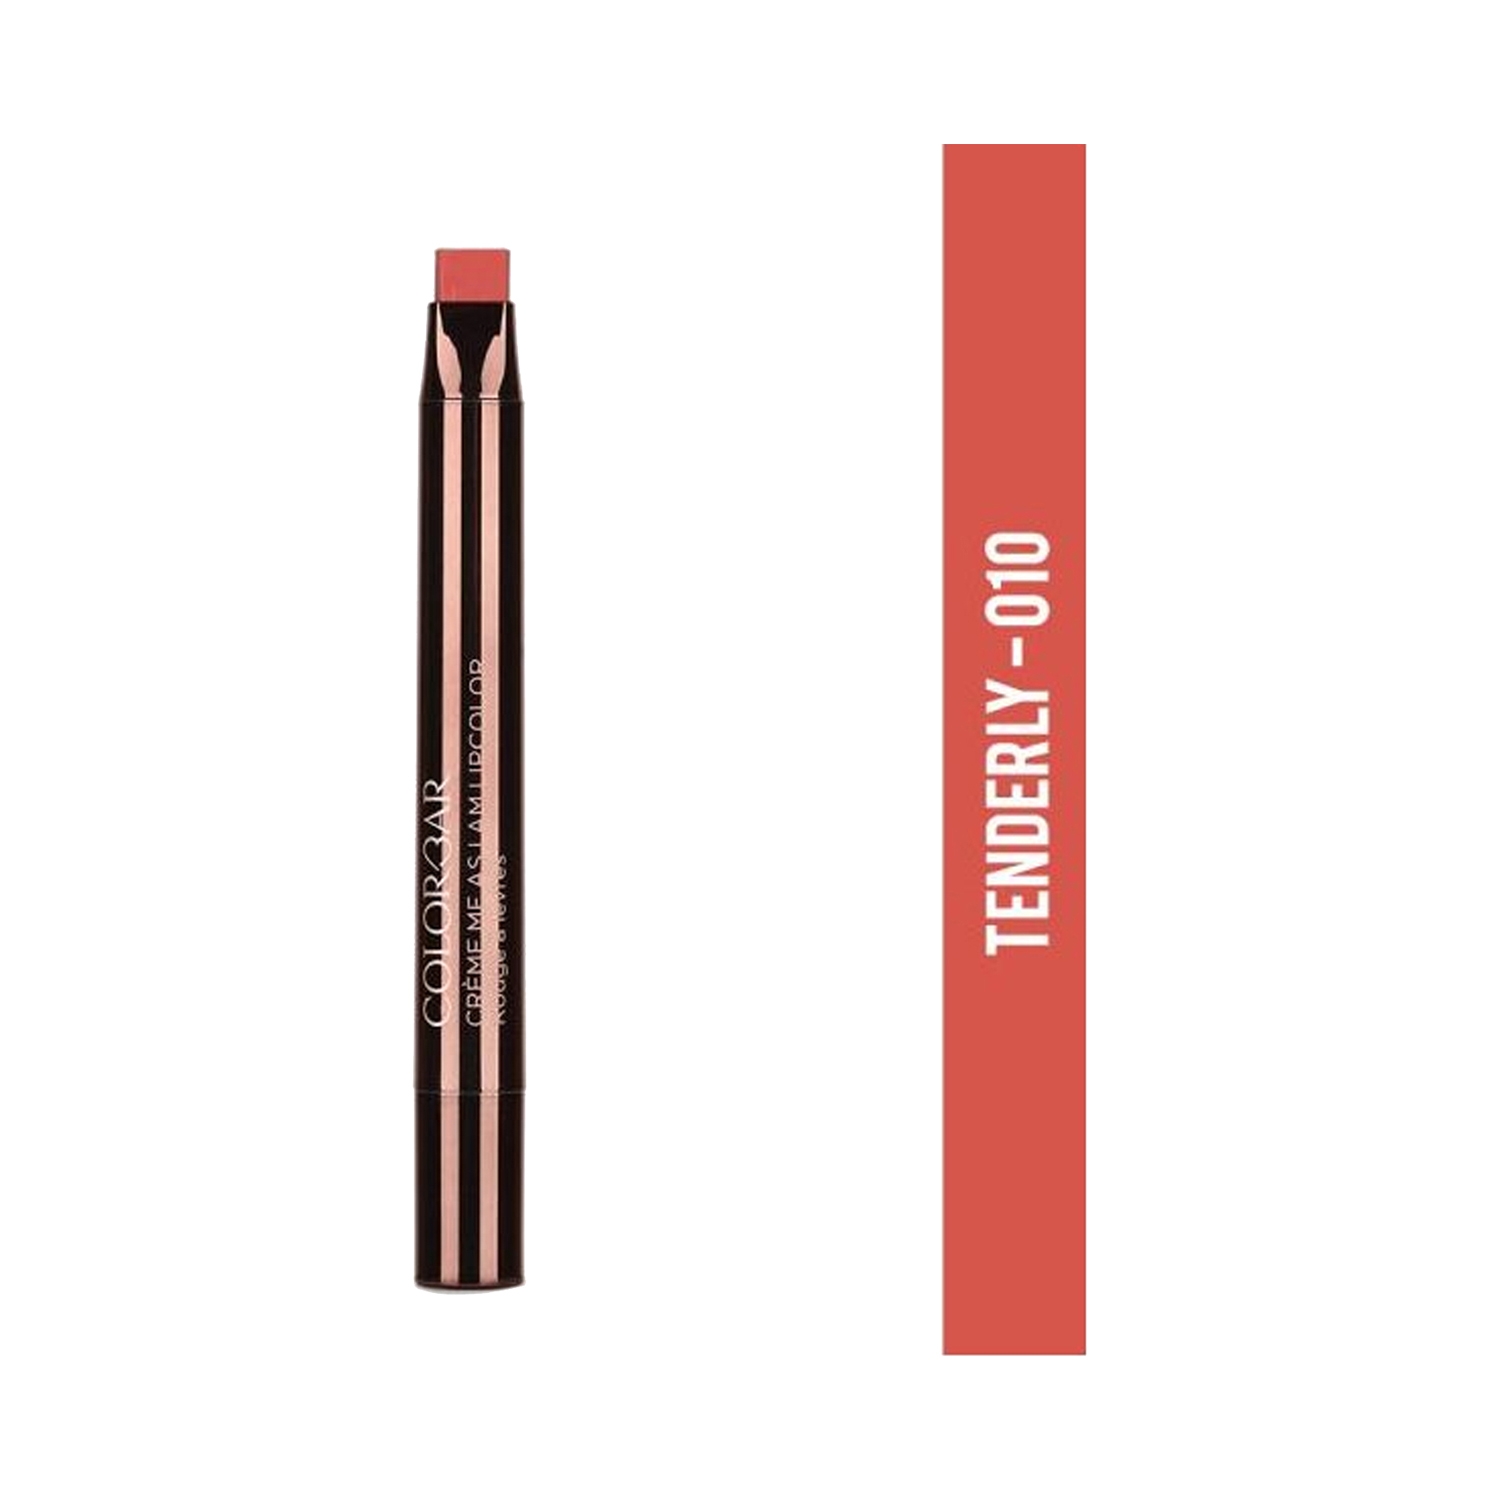 Colorbar | Colorbar Creme Me As I Am Lipcolor - 010 Tenderly (0.8g)